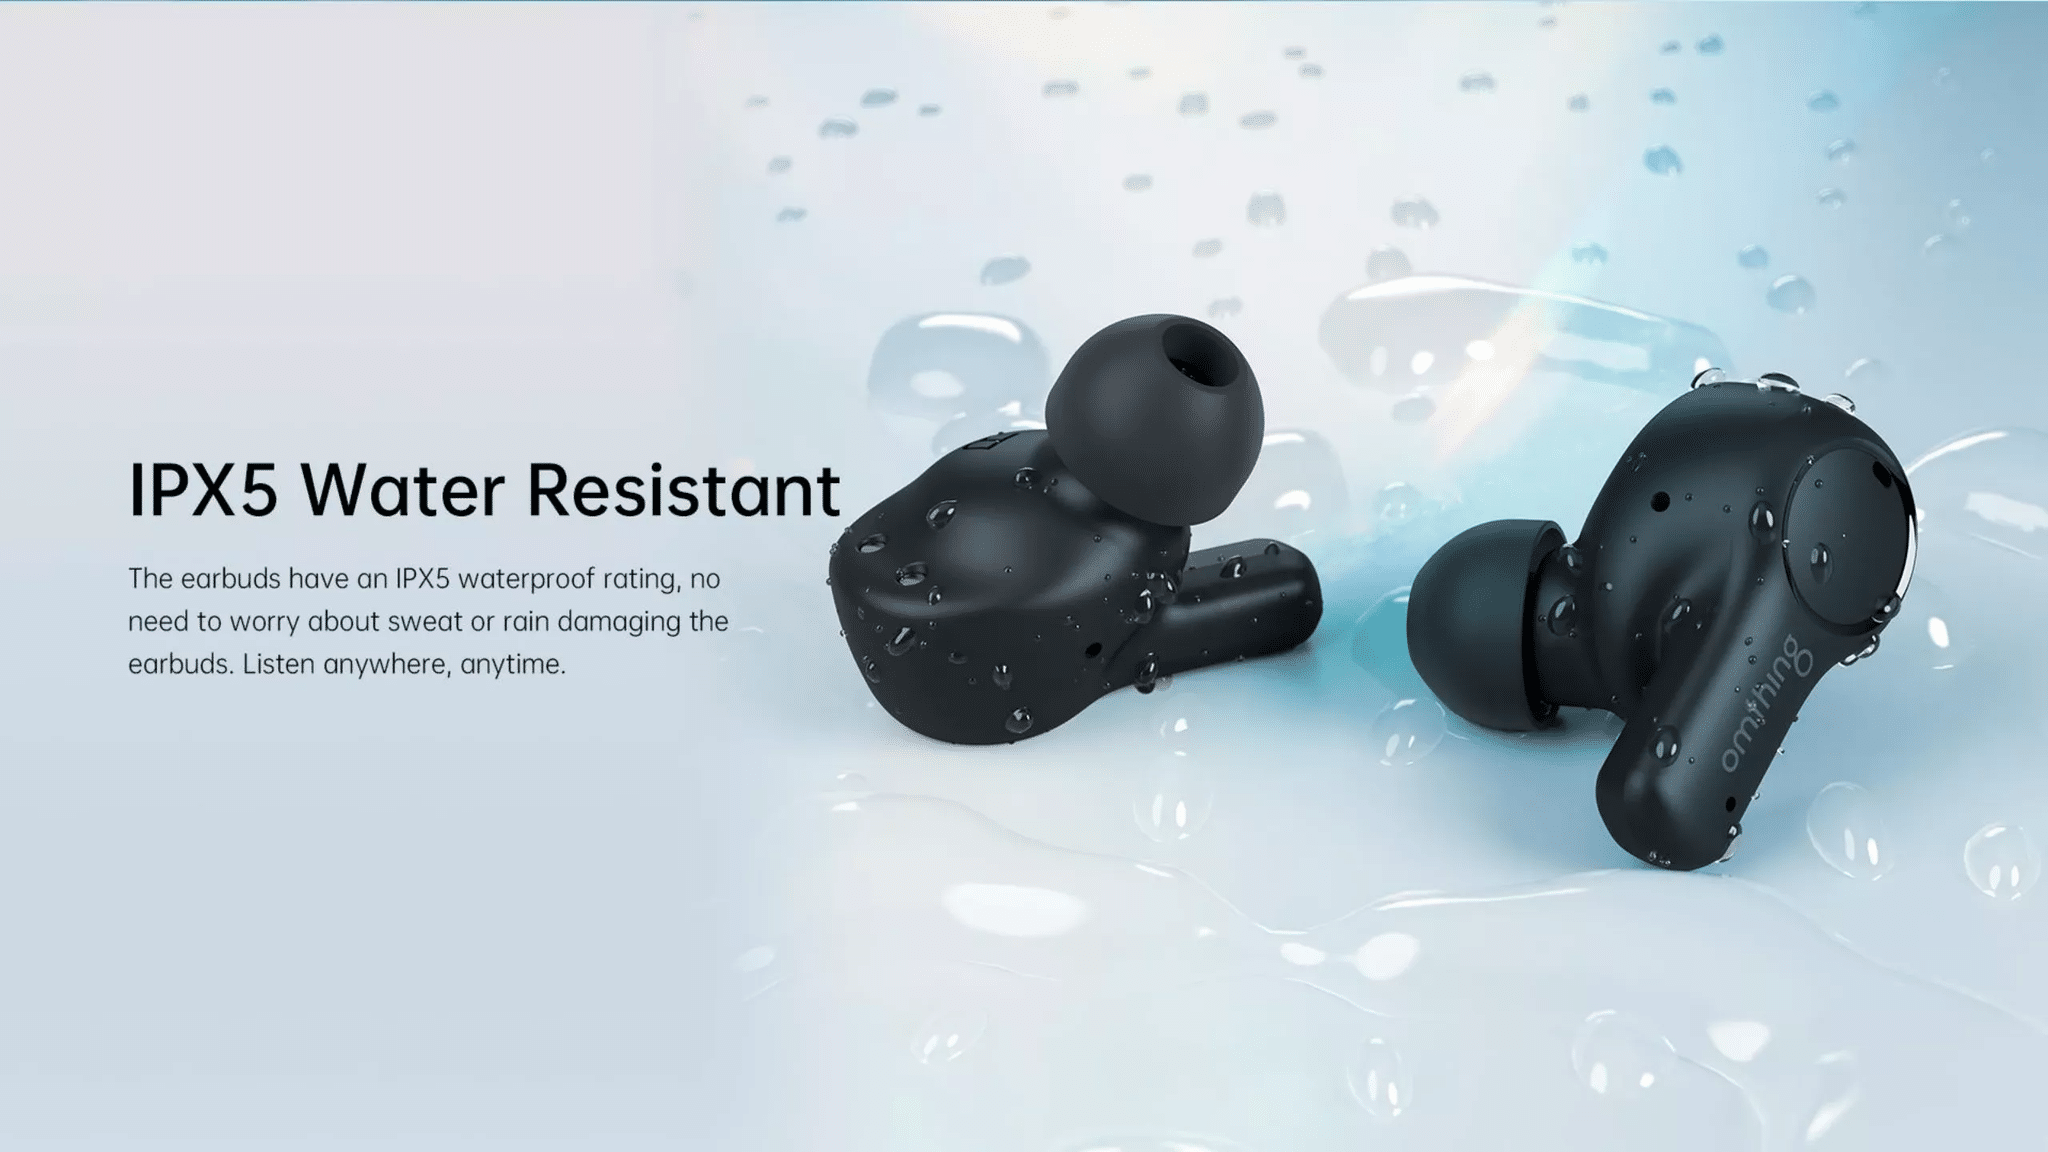 1MORE Omthing AirFree Plus True Wireless Earbuds 3 2